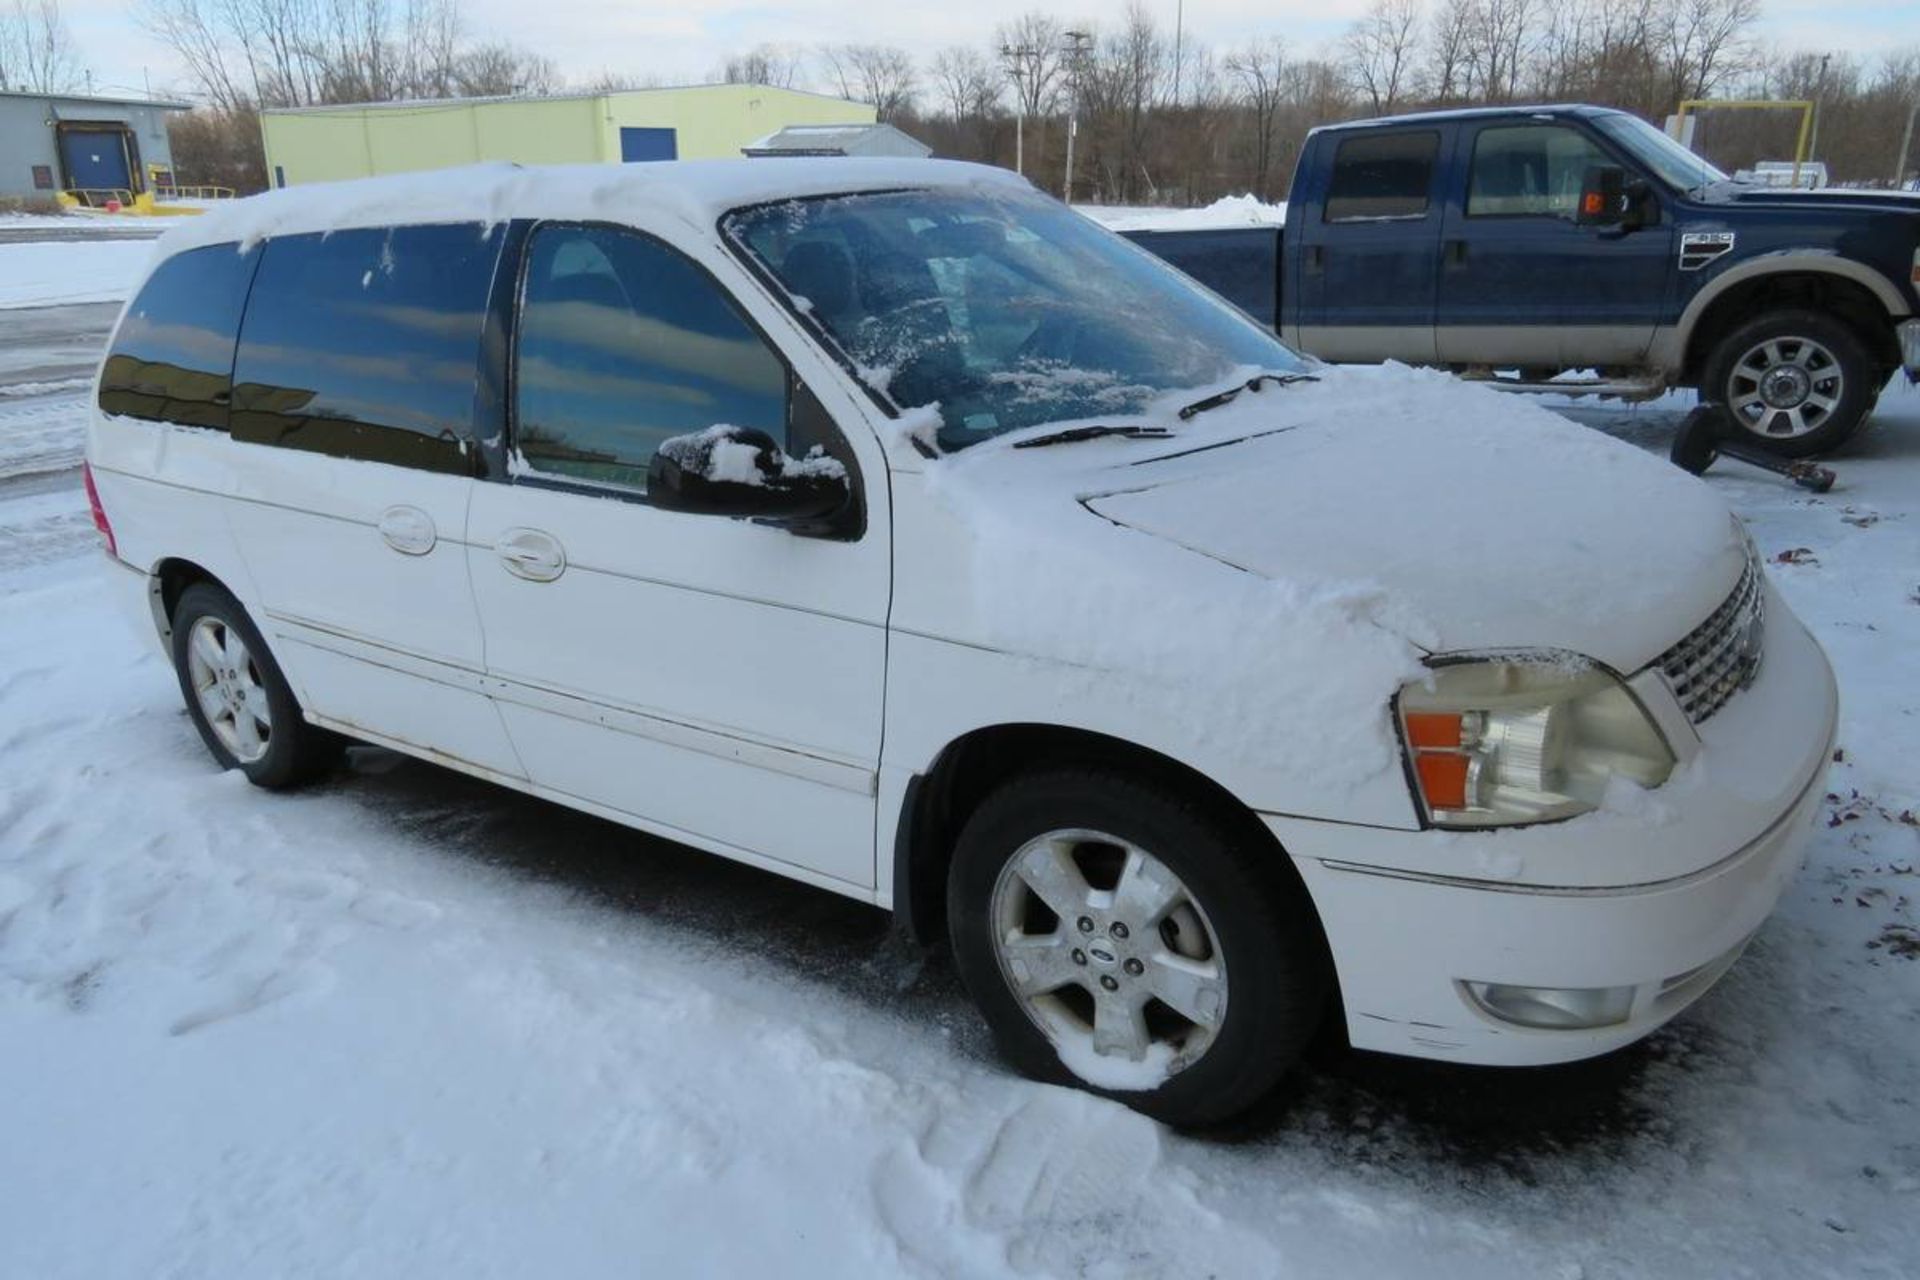 2005 Ford Freestyle Van - Image 4 of 23